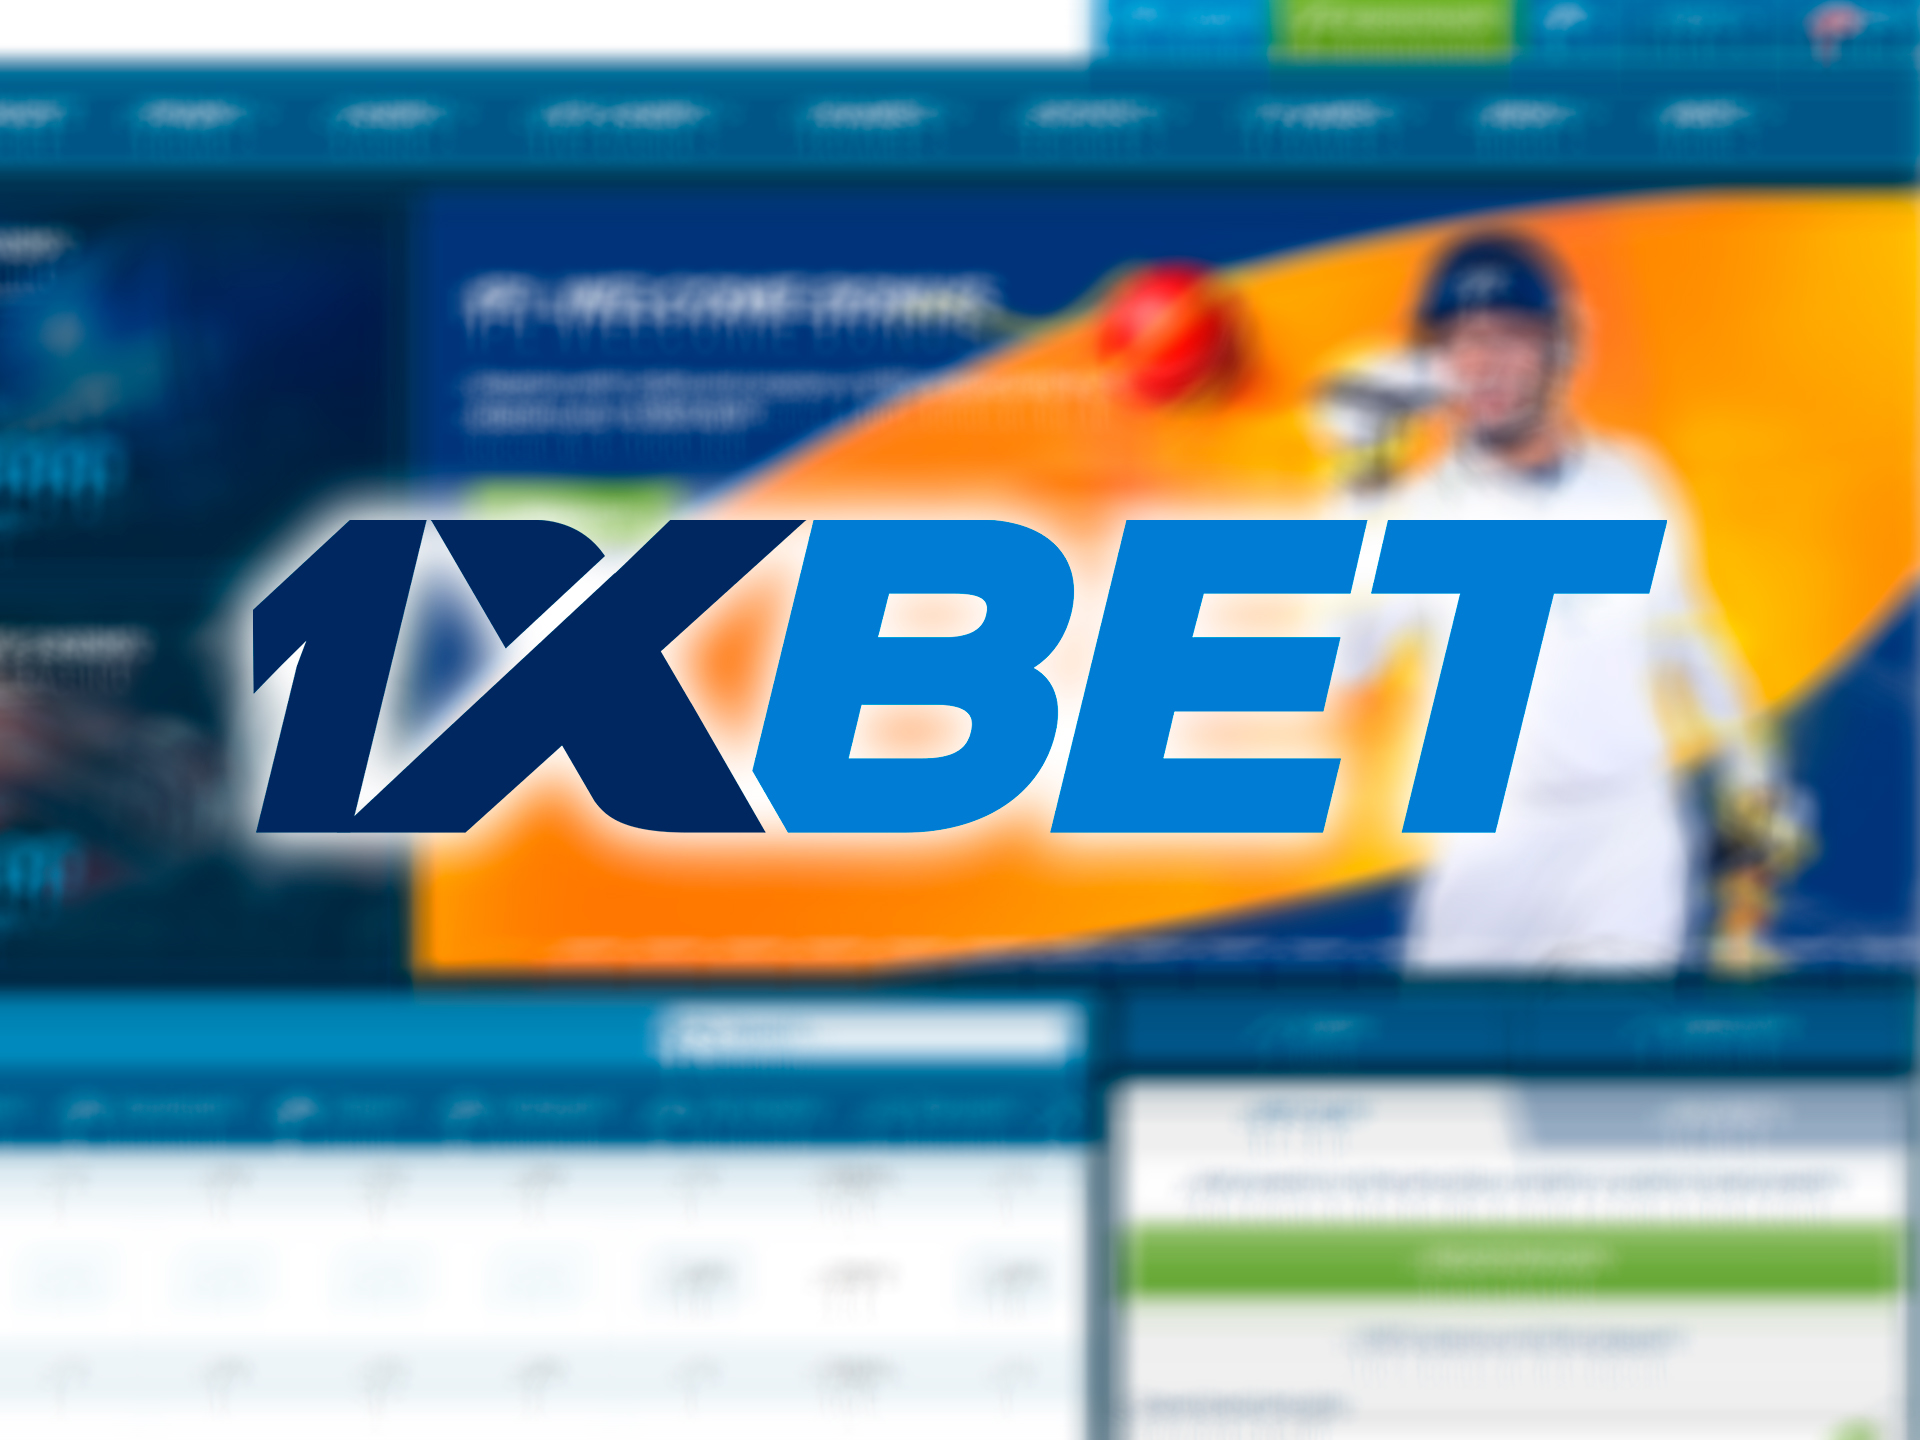 Summary about 1xBet India.